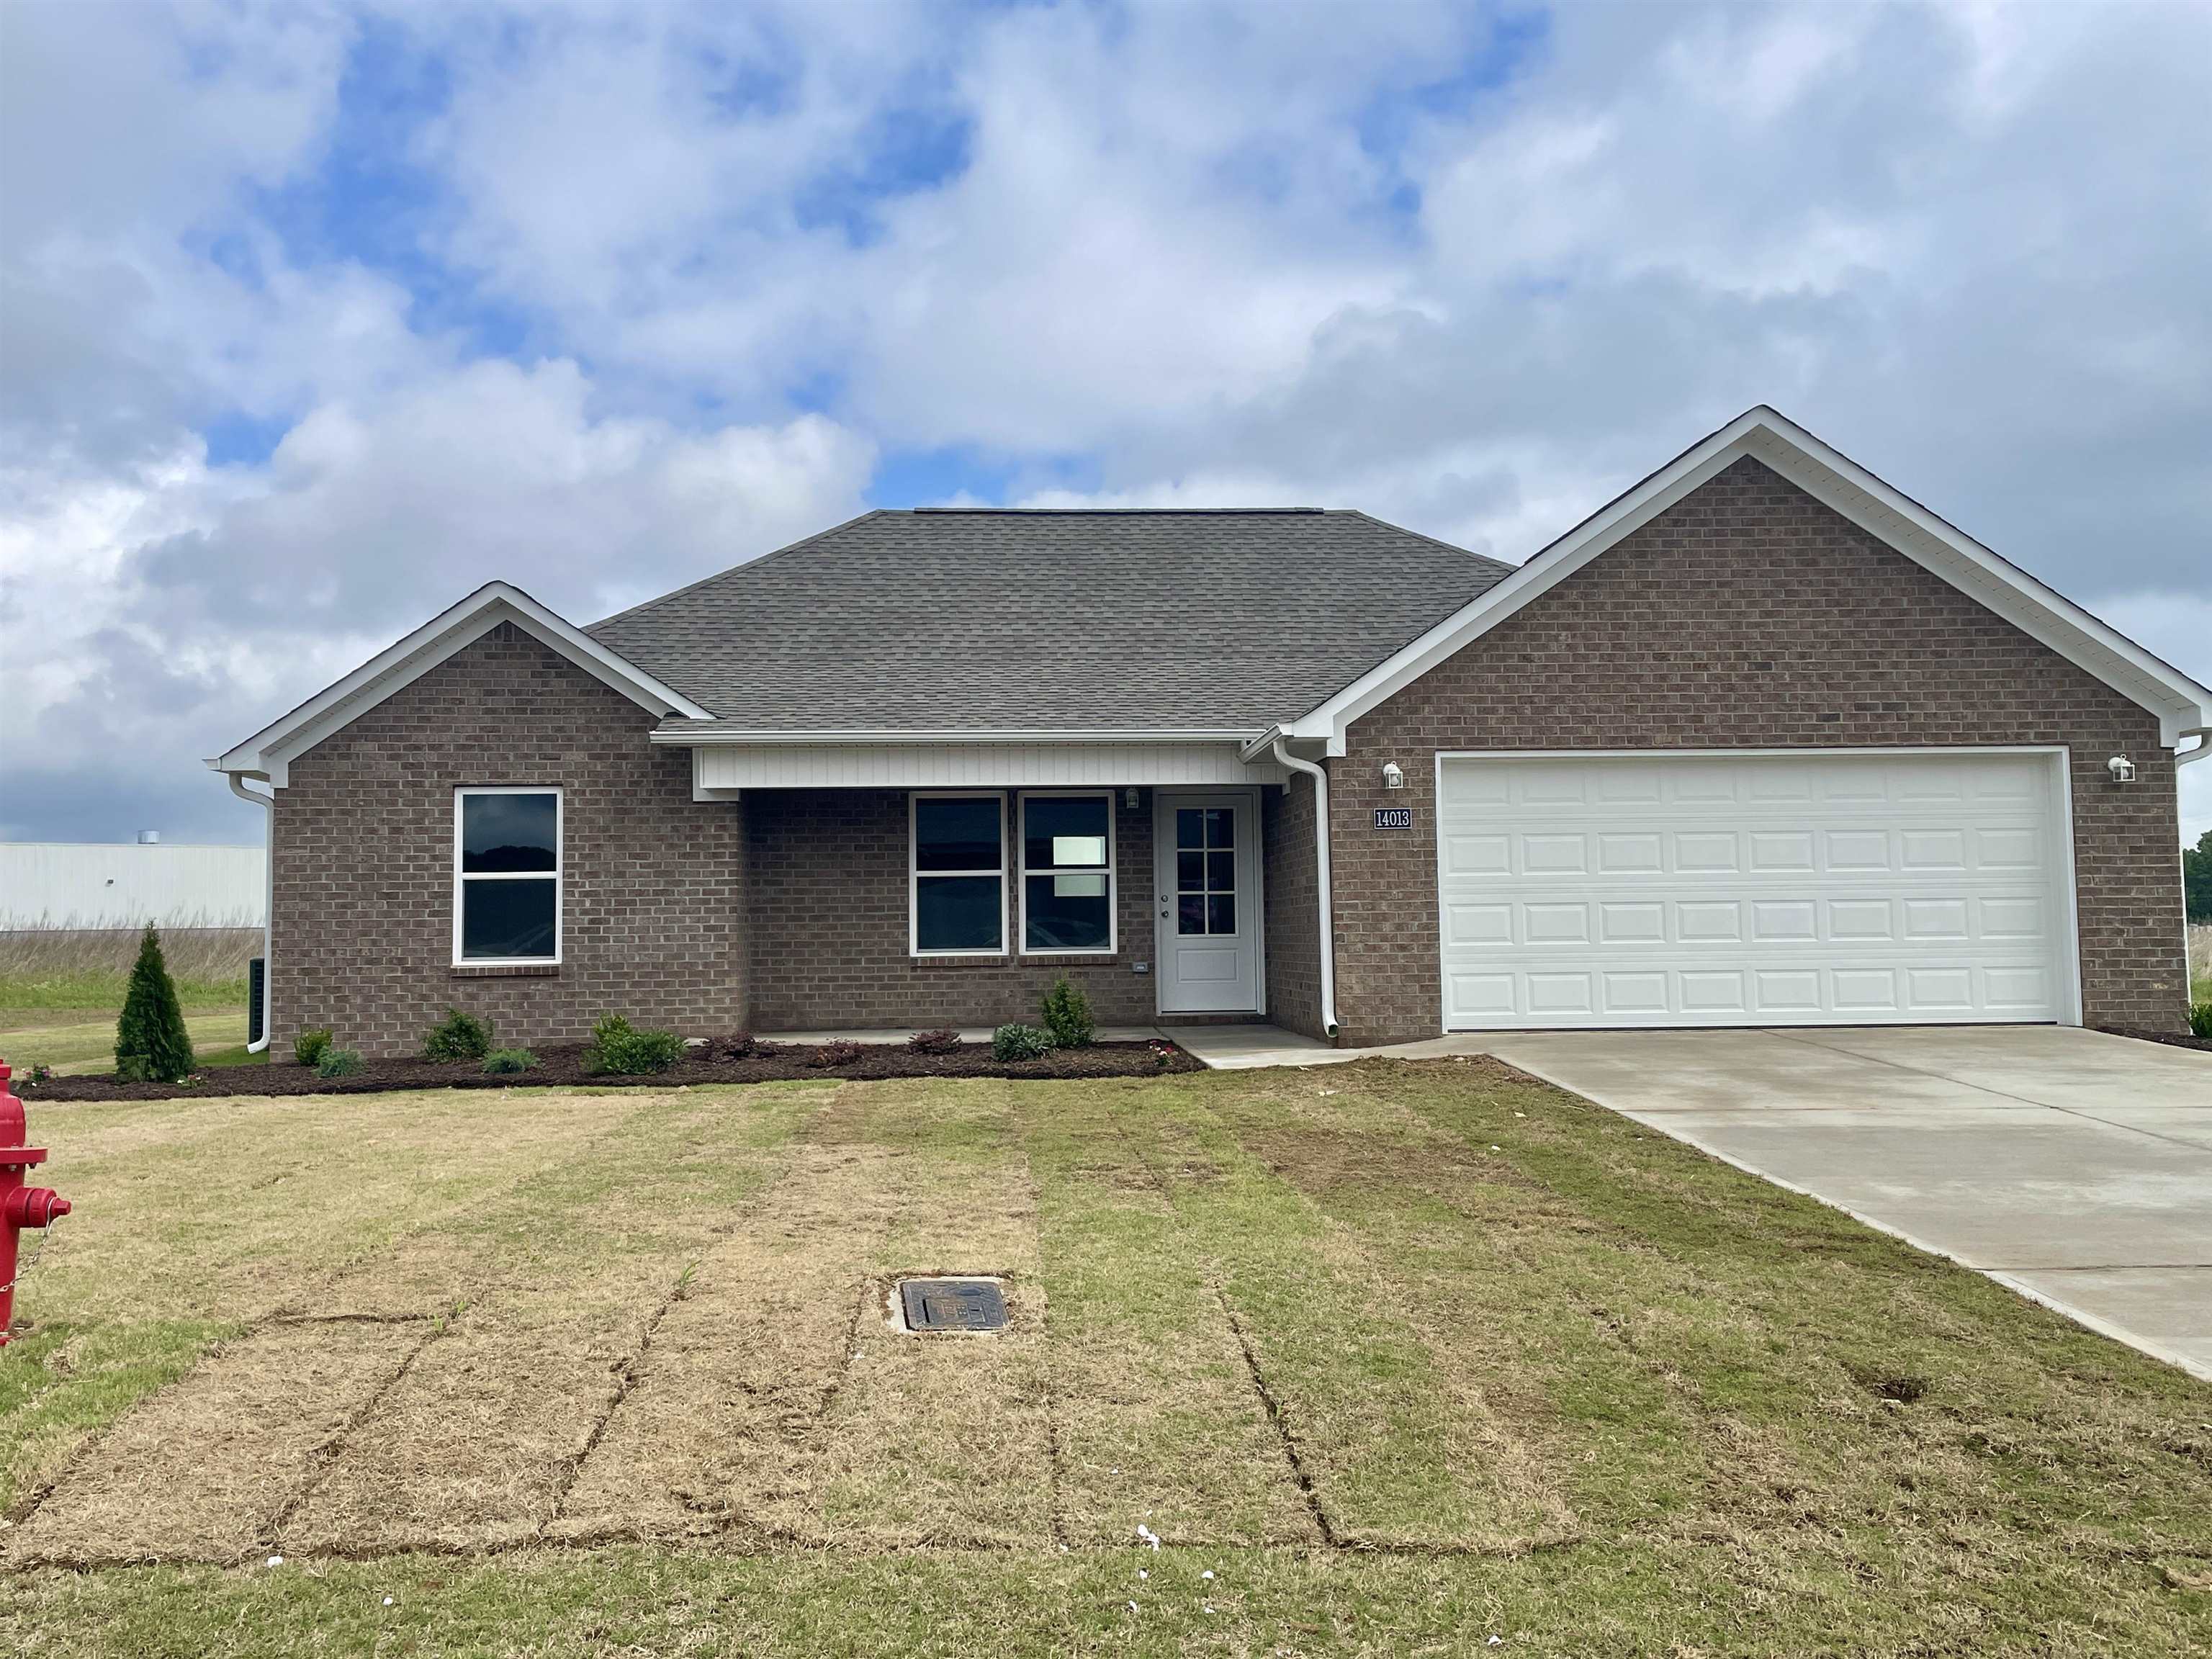 14013 Westhaven Cove, Milan, TN 